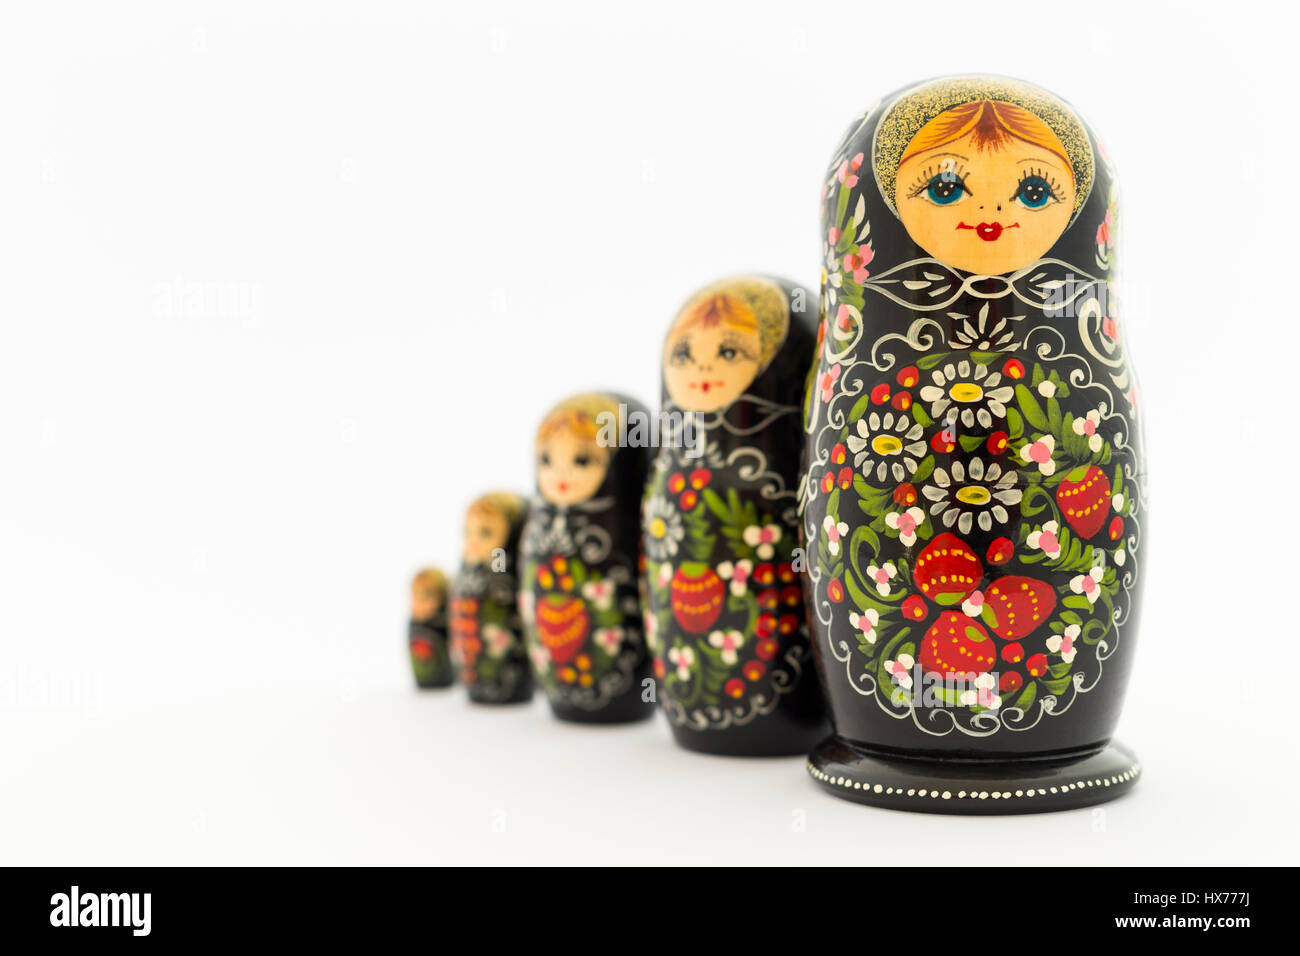 Beautiful black russian nesting dolls (matryoshka dolls) with white, green and red painting in front of white background Stock Photo